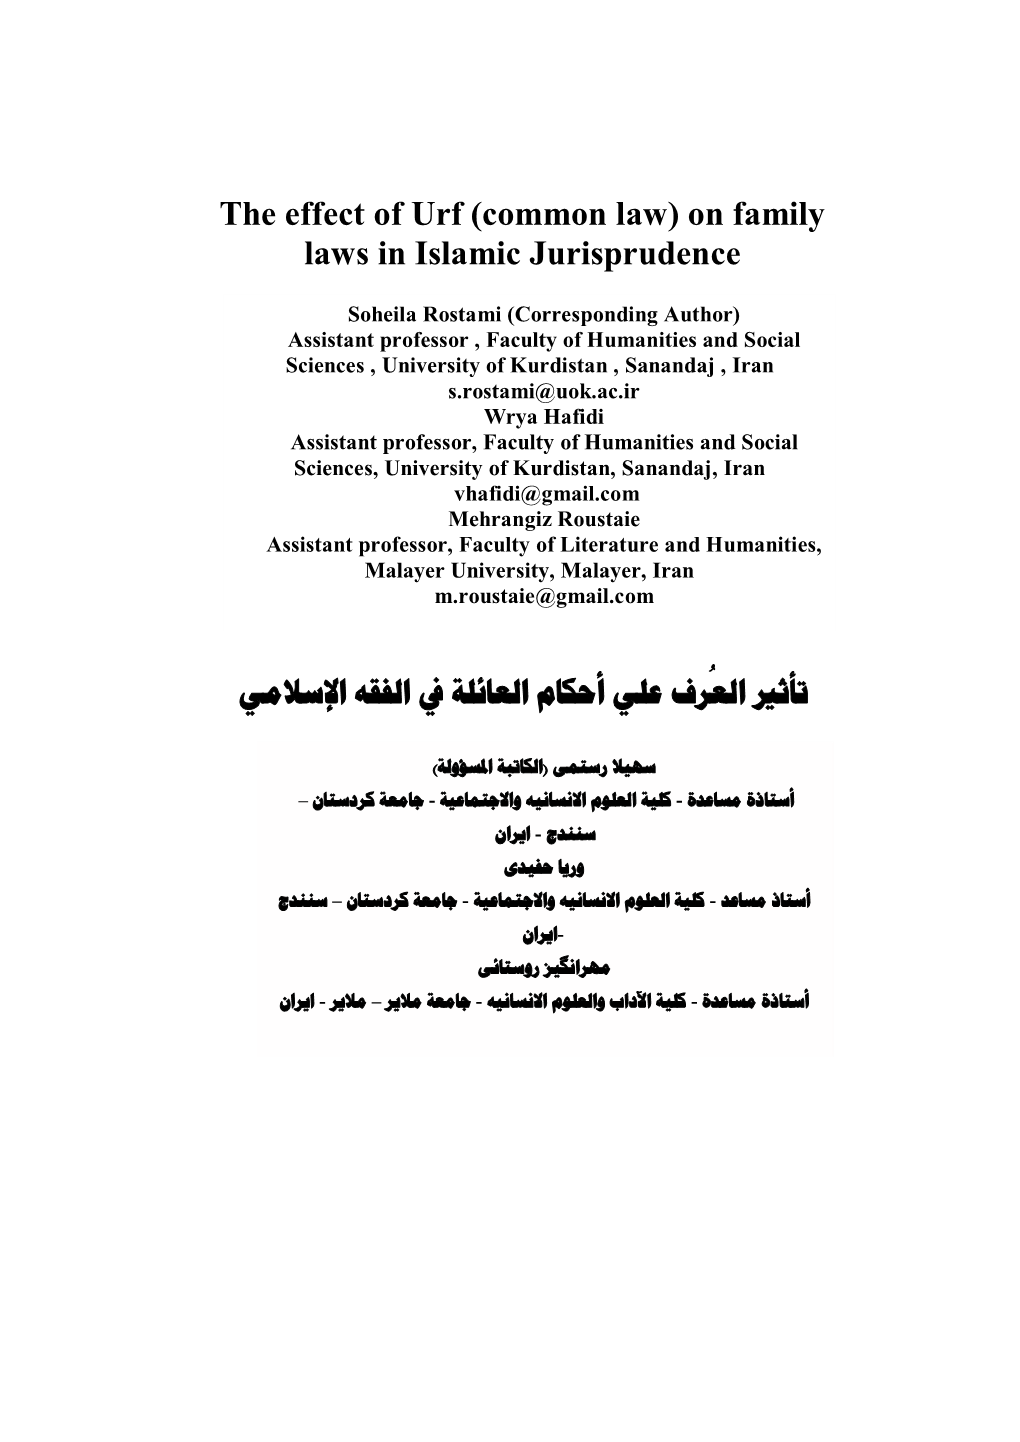 The Effect of Urf (Common Law) on Family Laws in Islamic Jurisprudence